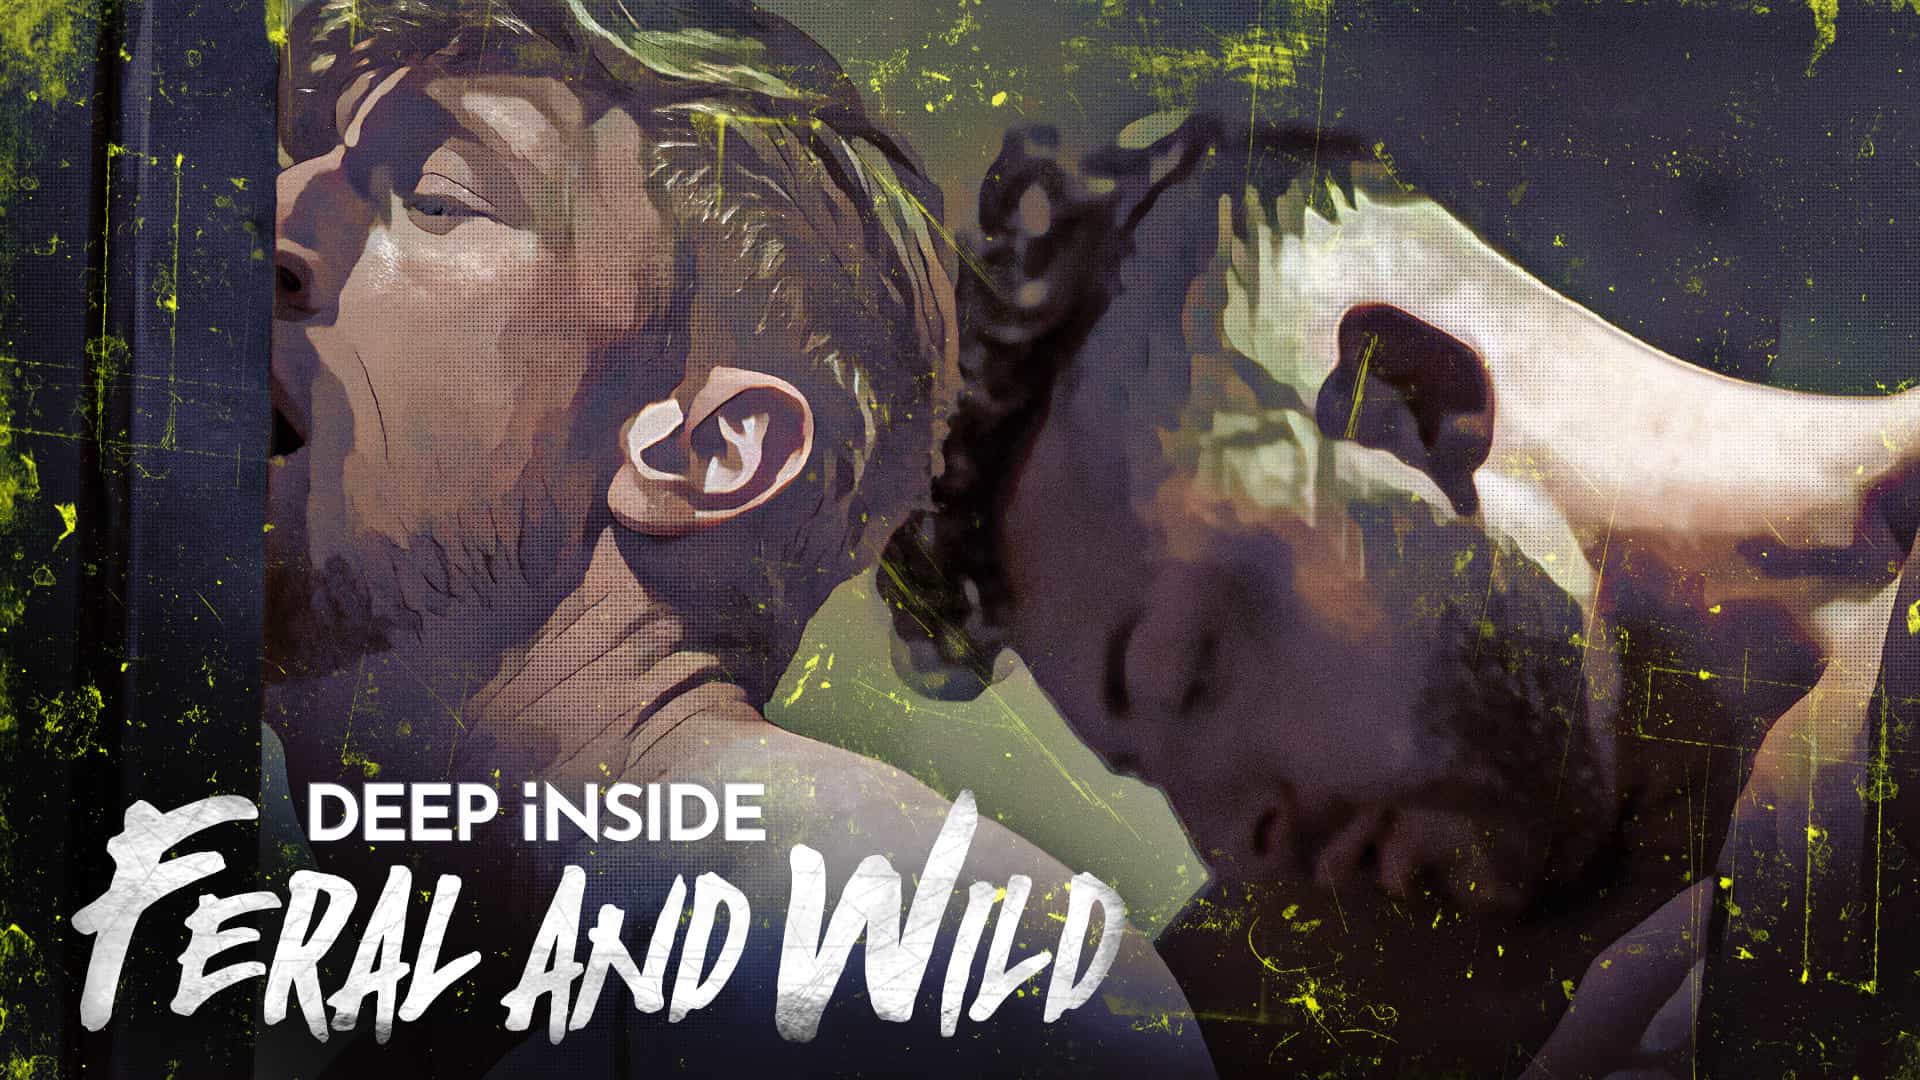 Feral And Wild – Jesse Stone and Lucca Mazzi